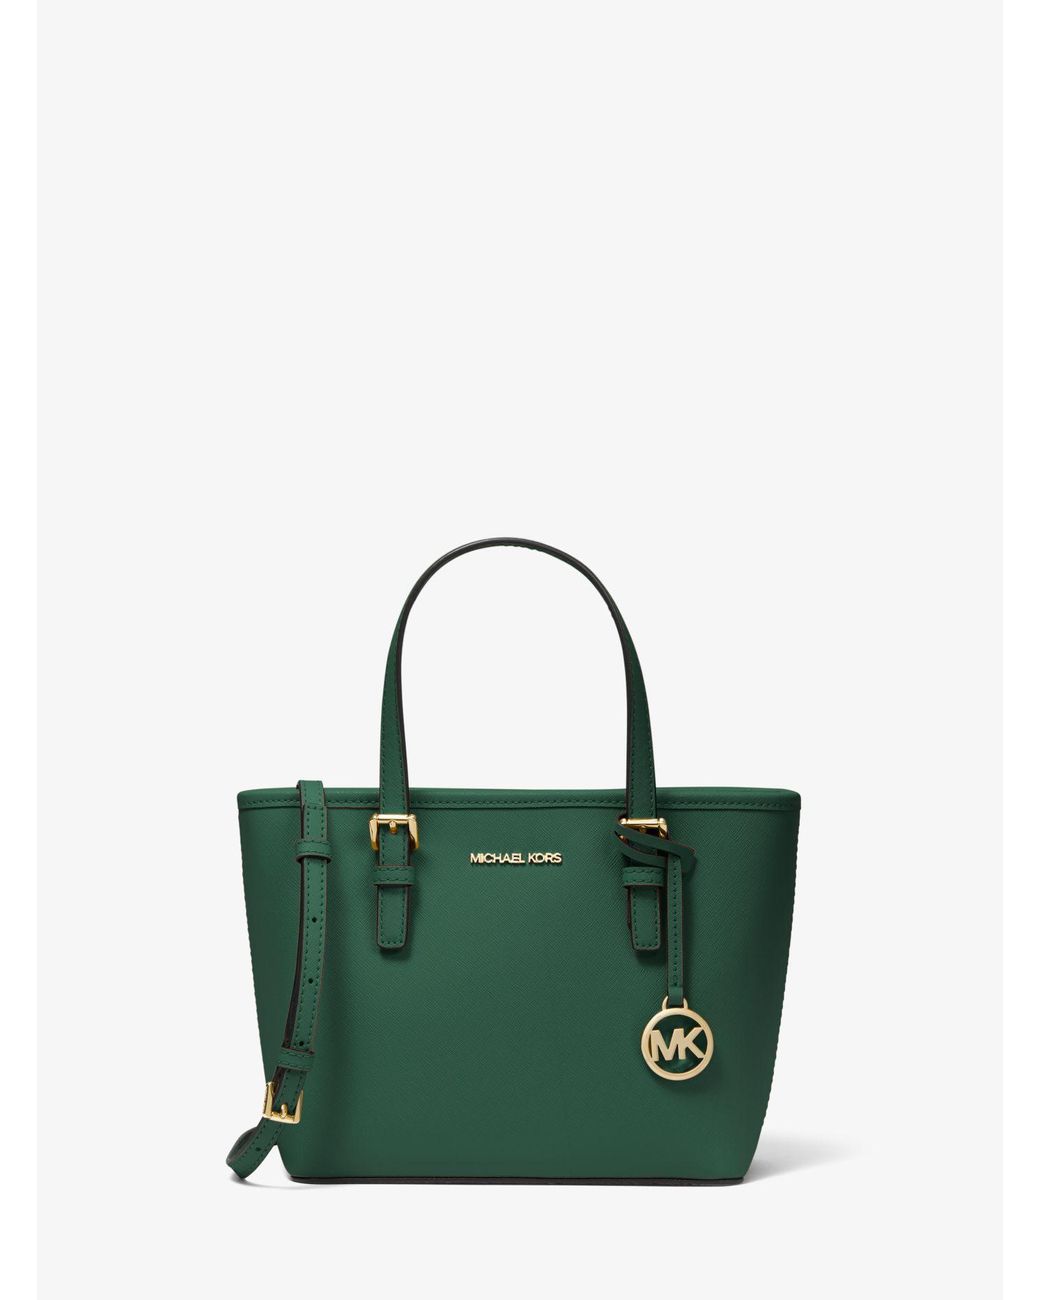 Michael Kors Jet Set Travel Extra-small Saffiano Leather Top-zip Tote Bag  in Green | Lyst